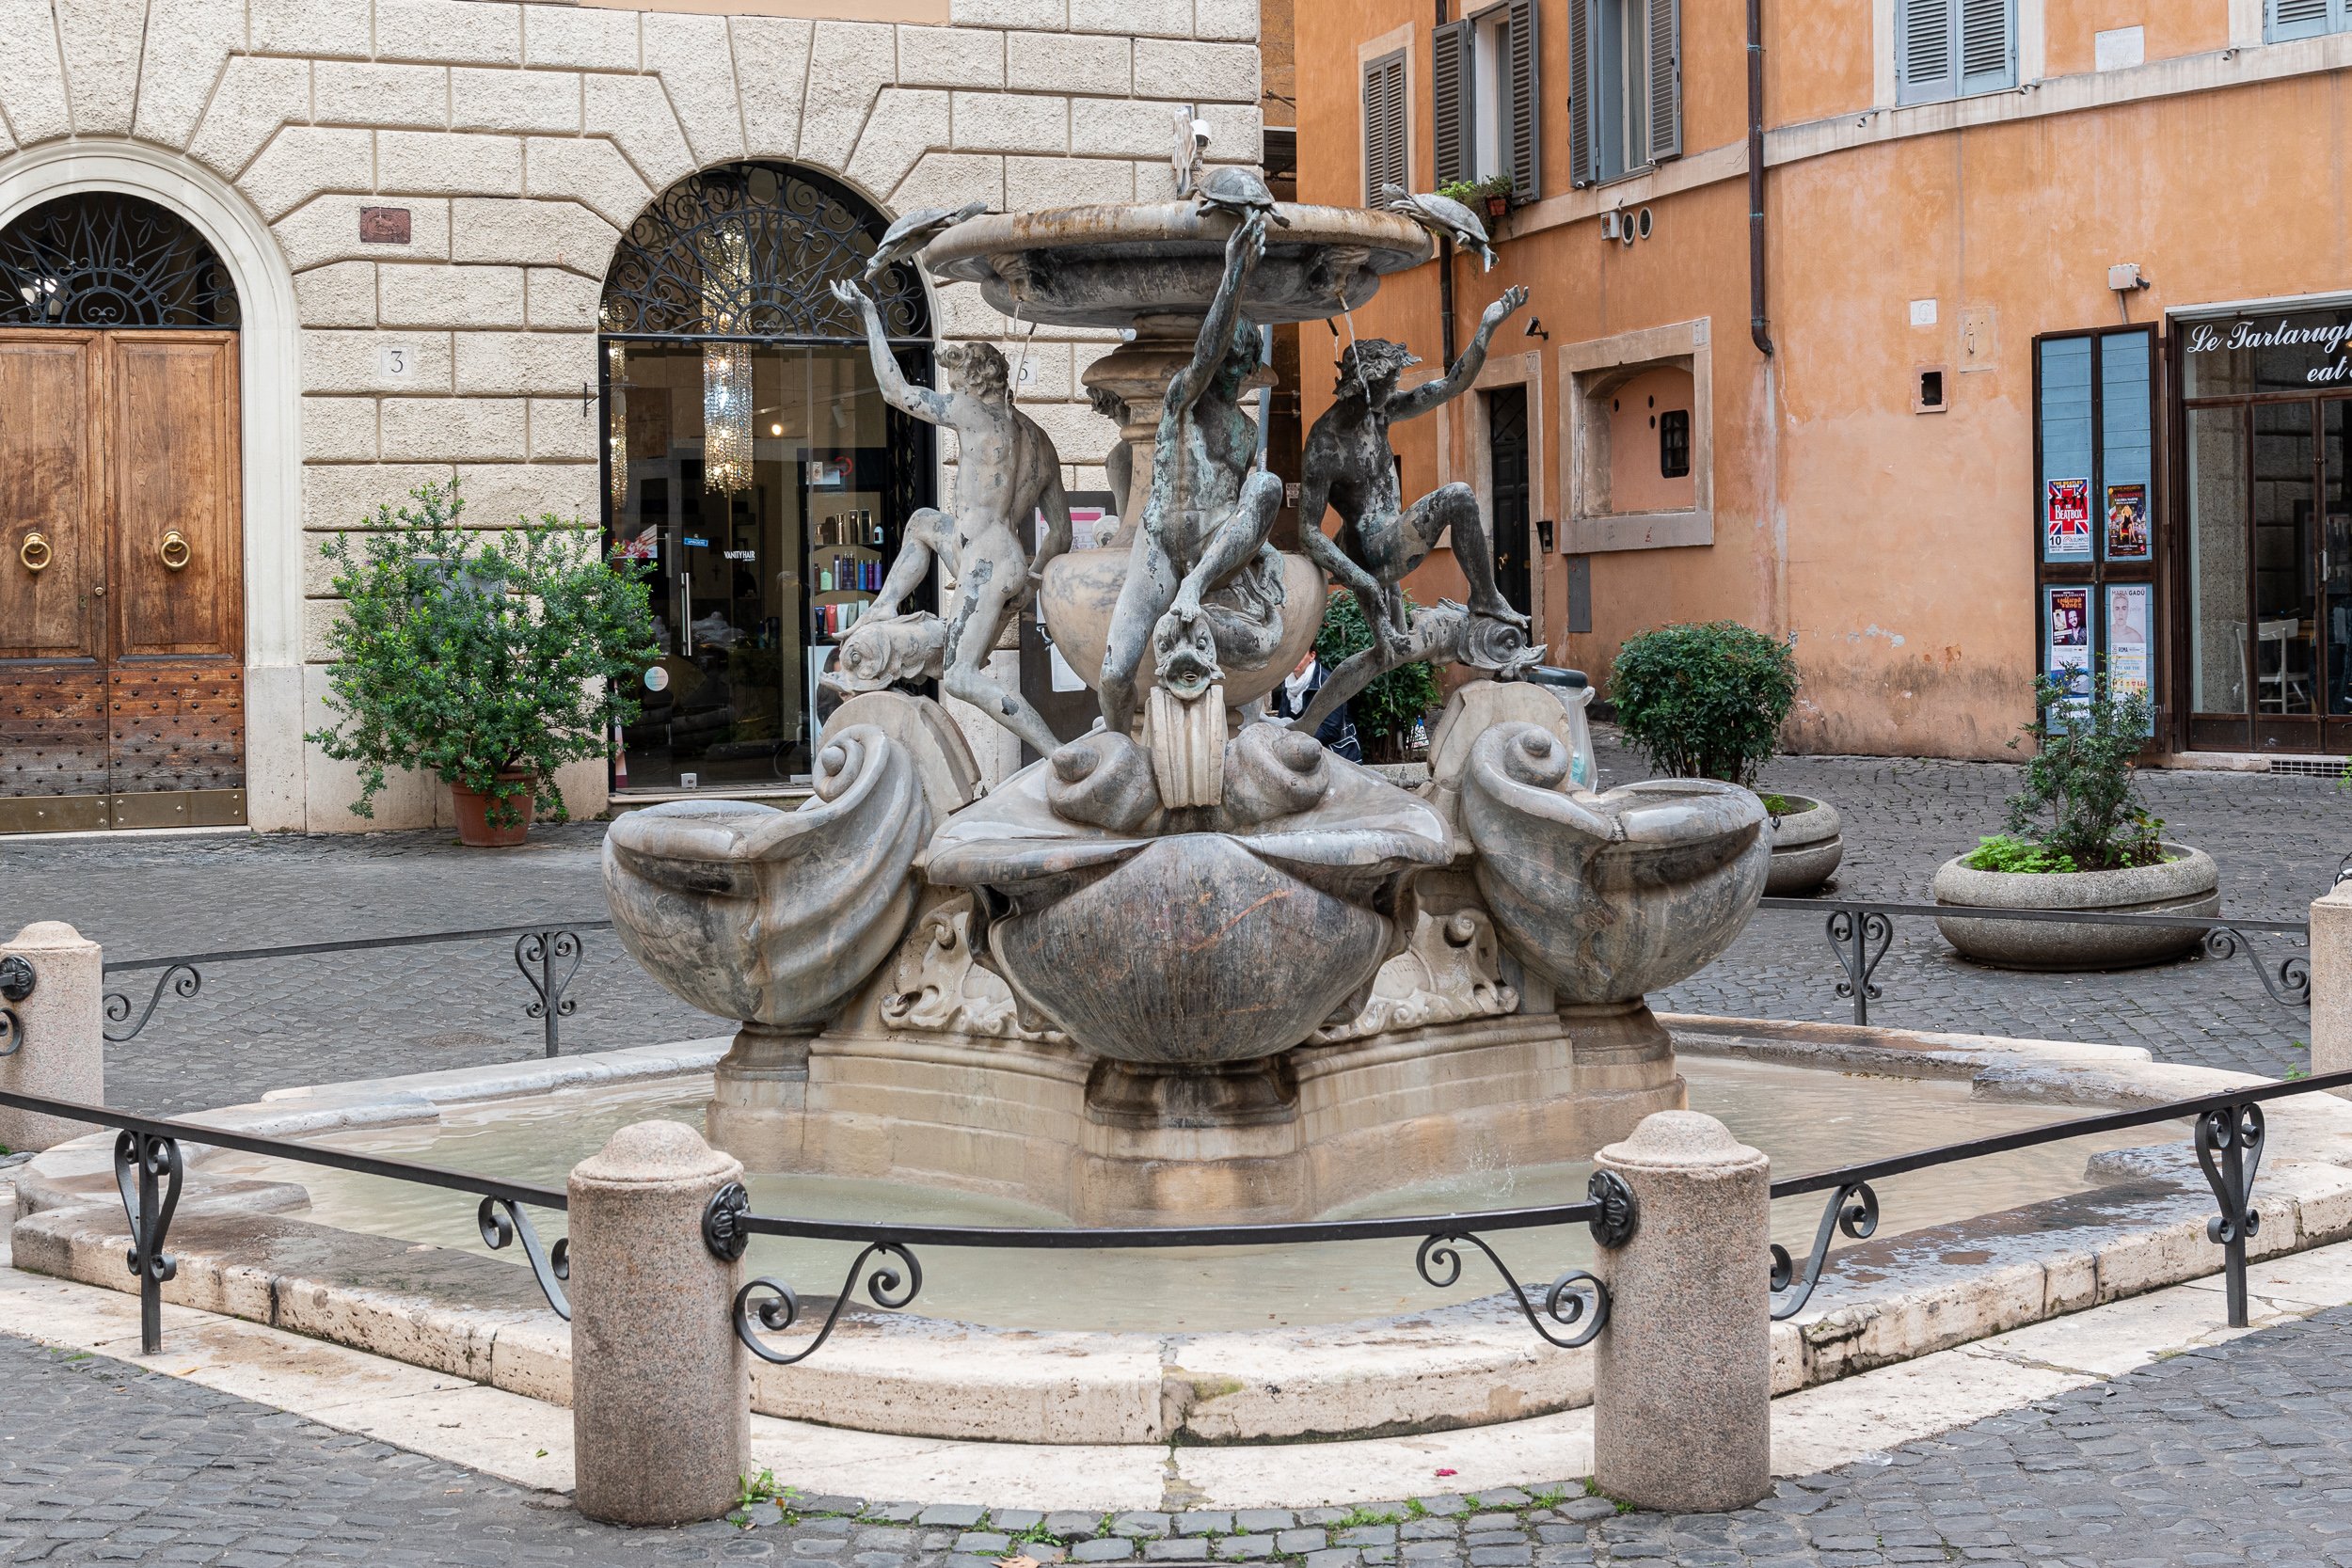 Districts of Rome - Turtle Fountain